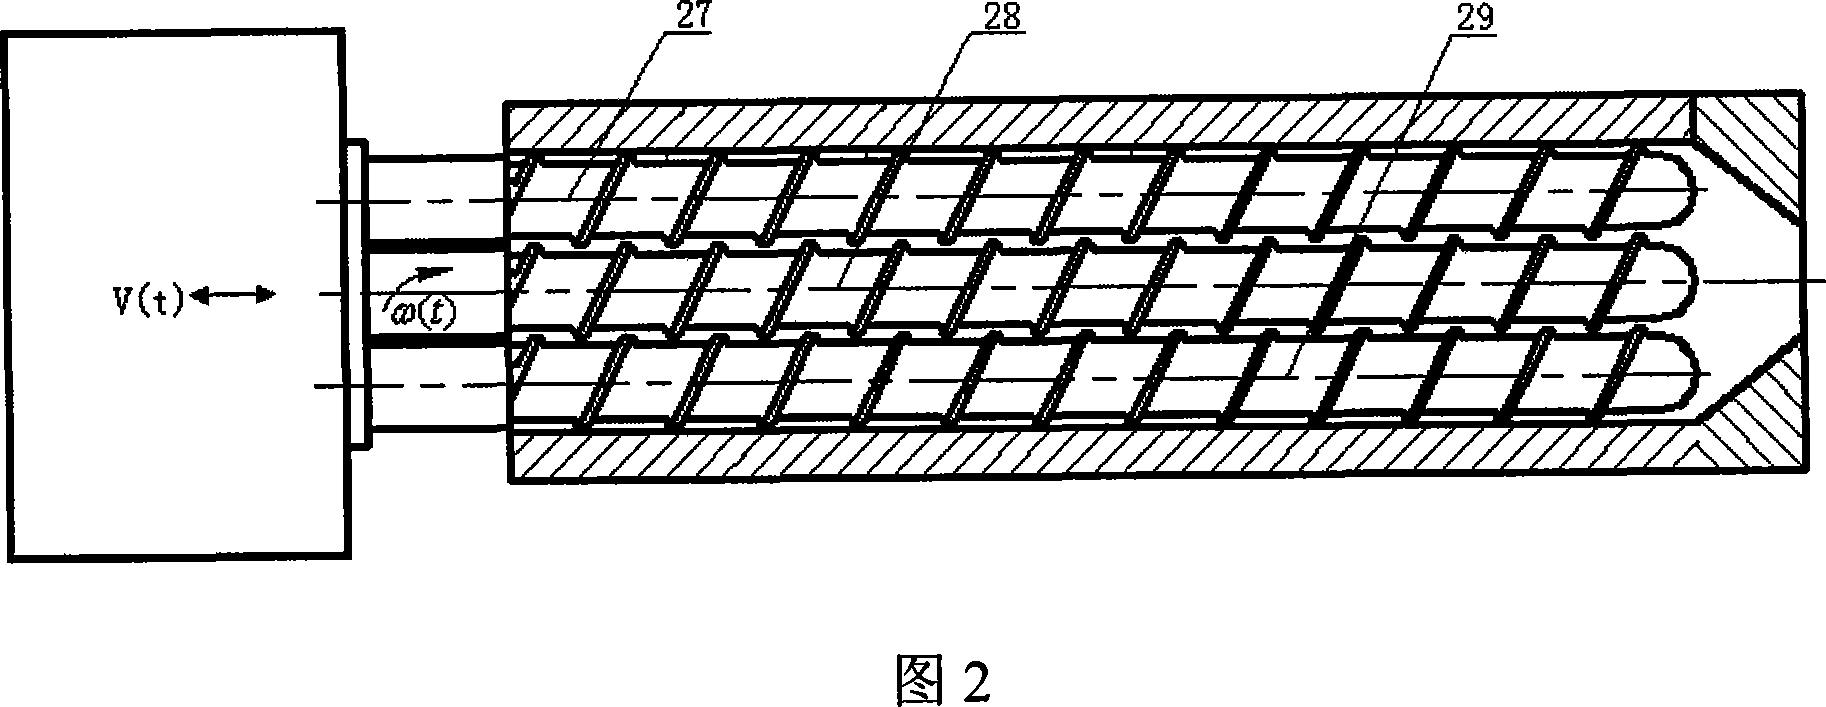 Pulse type shock processing on-line compound injection molding method and its equipment